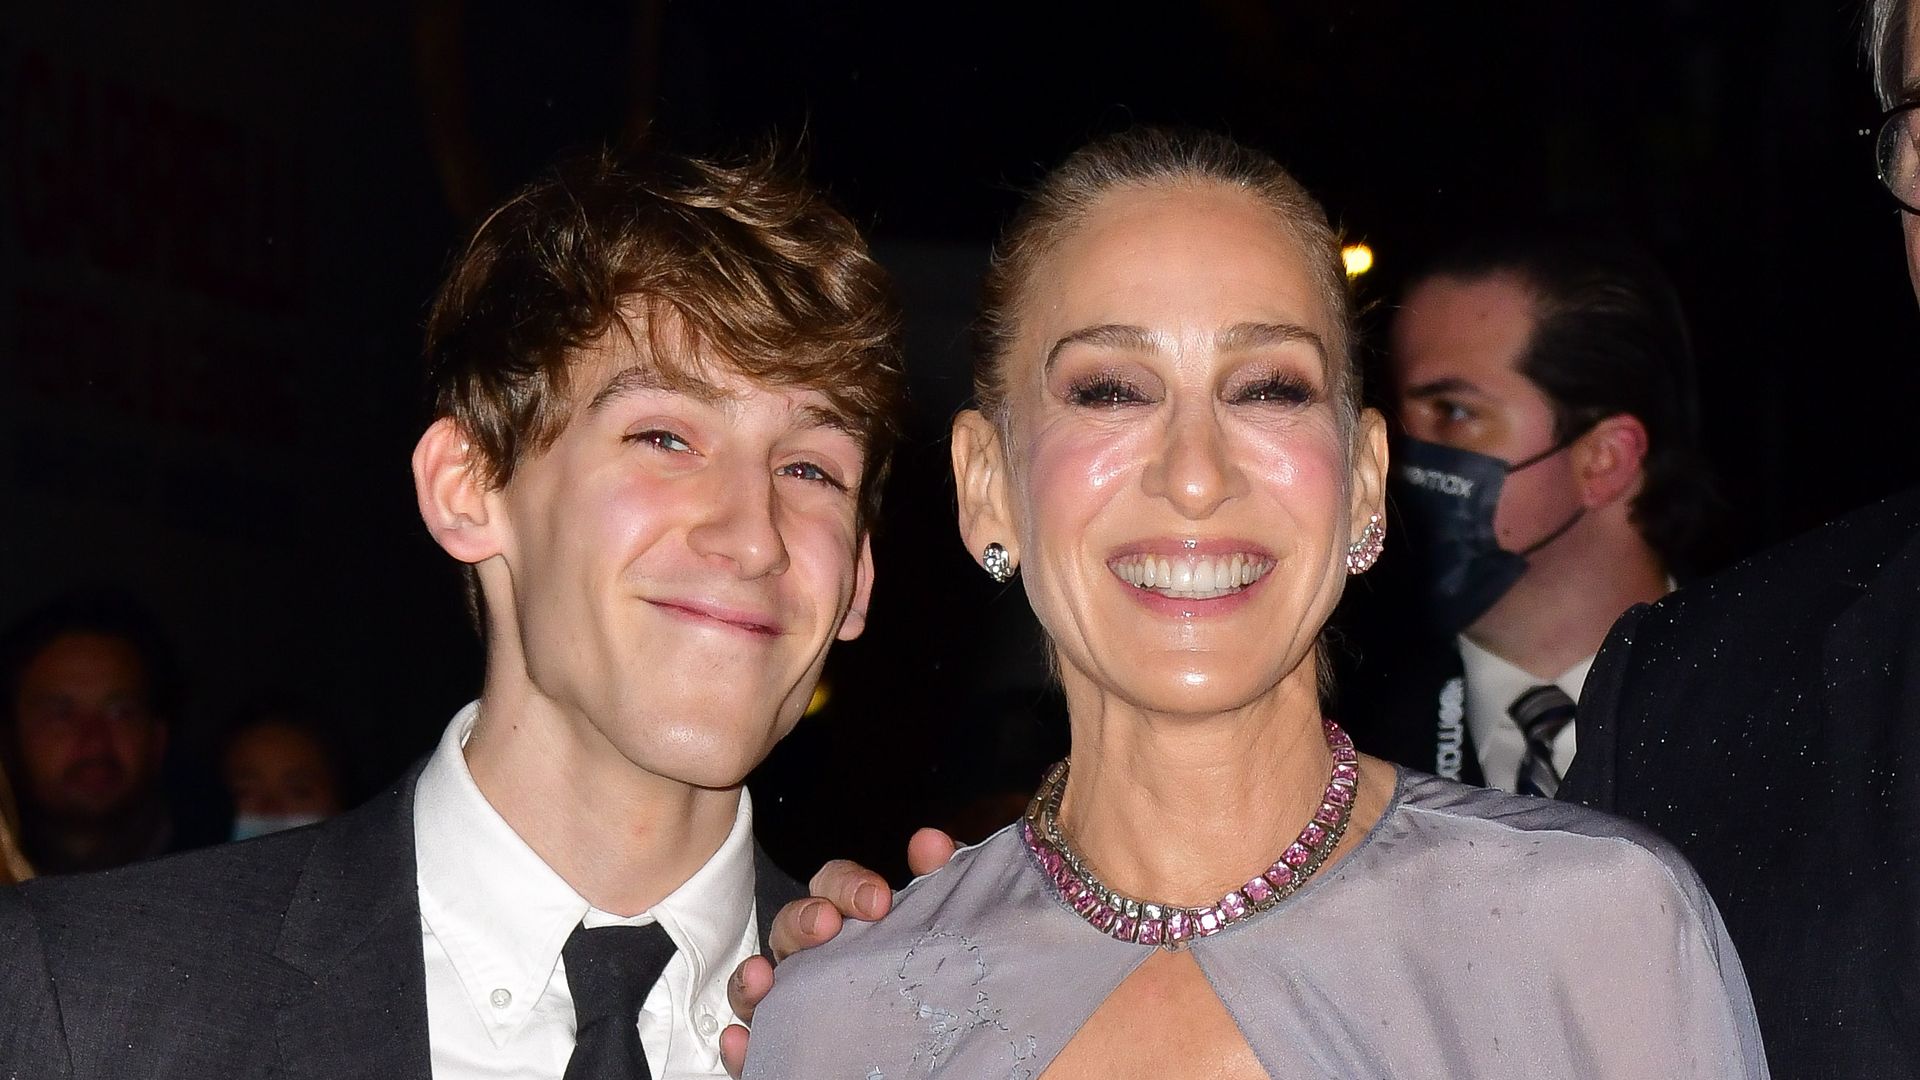 Sarah Jessica Parker's son James' acting gig revealed — and you won’t believe who with